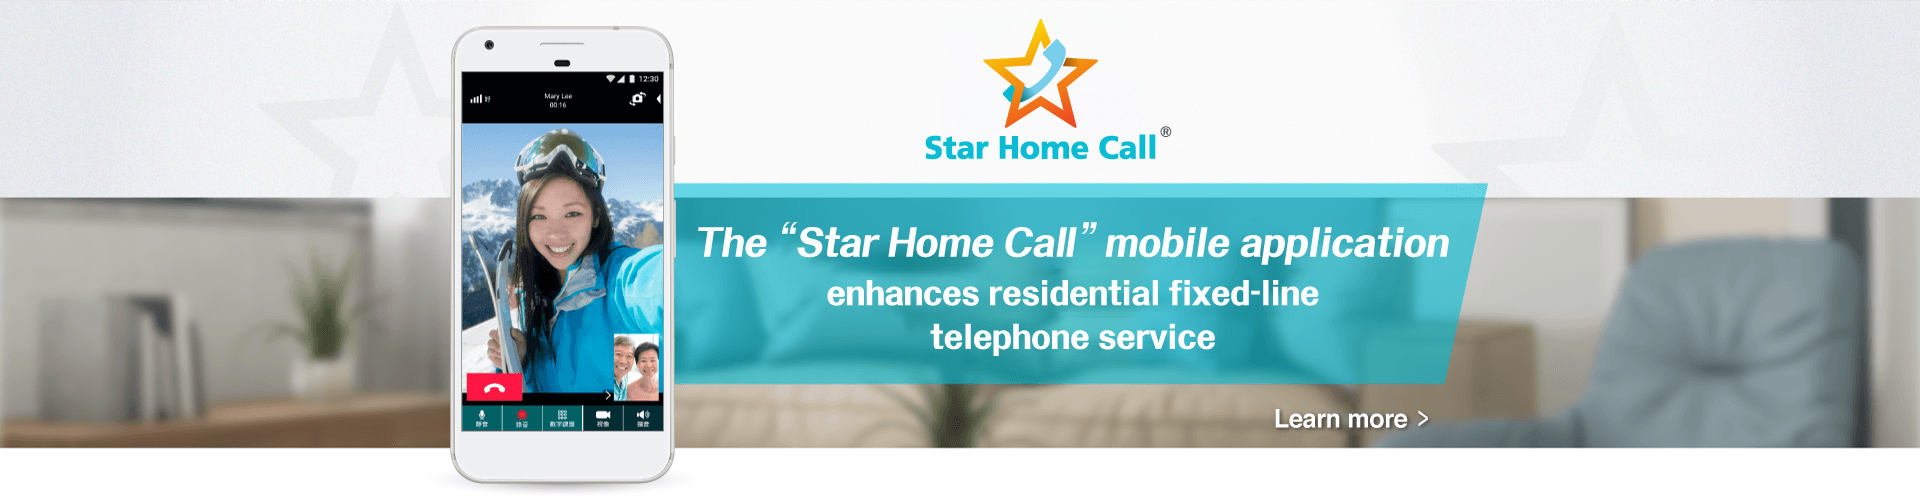 The Star Home Call mobile application<br/>enhances residential fixed-line telephone service